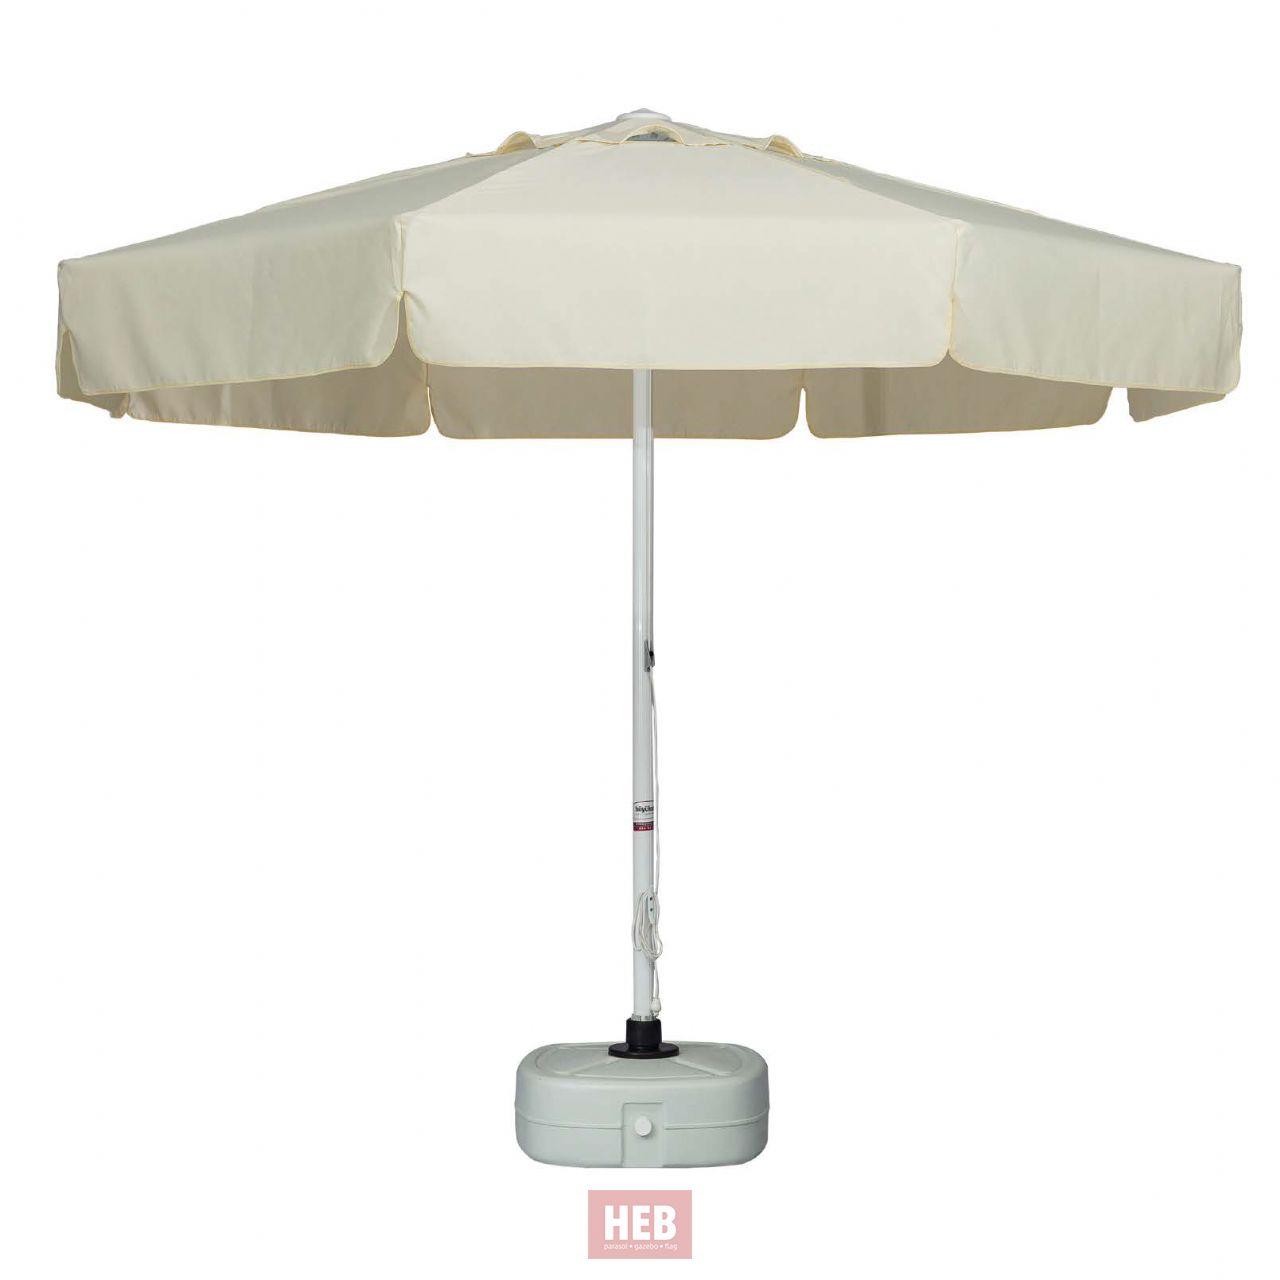 Castle Pulley System Parasol Round